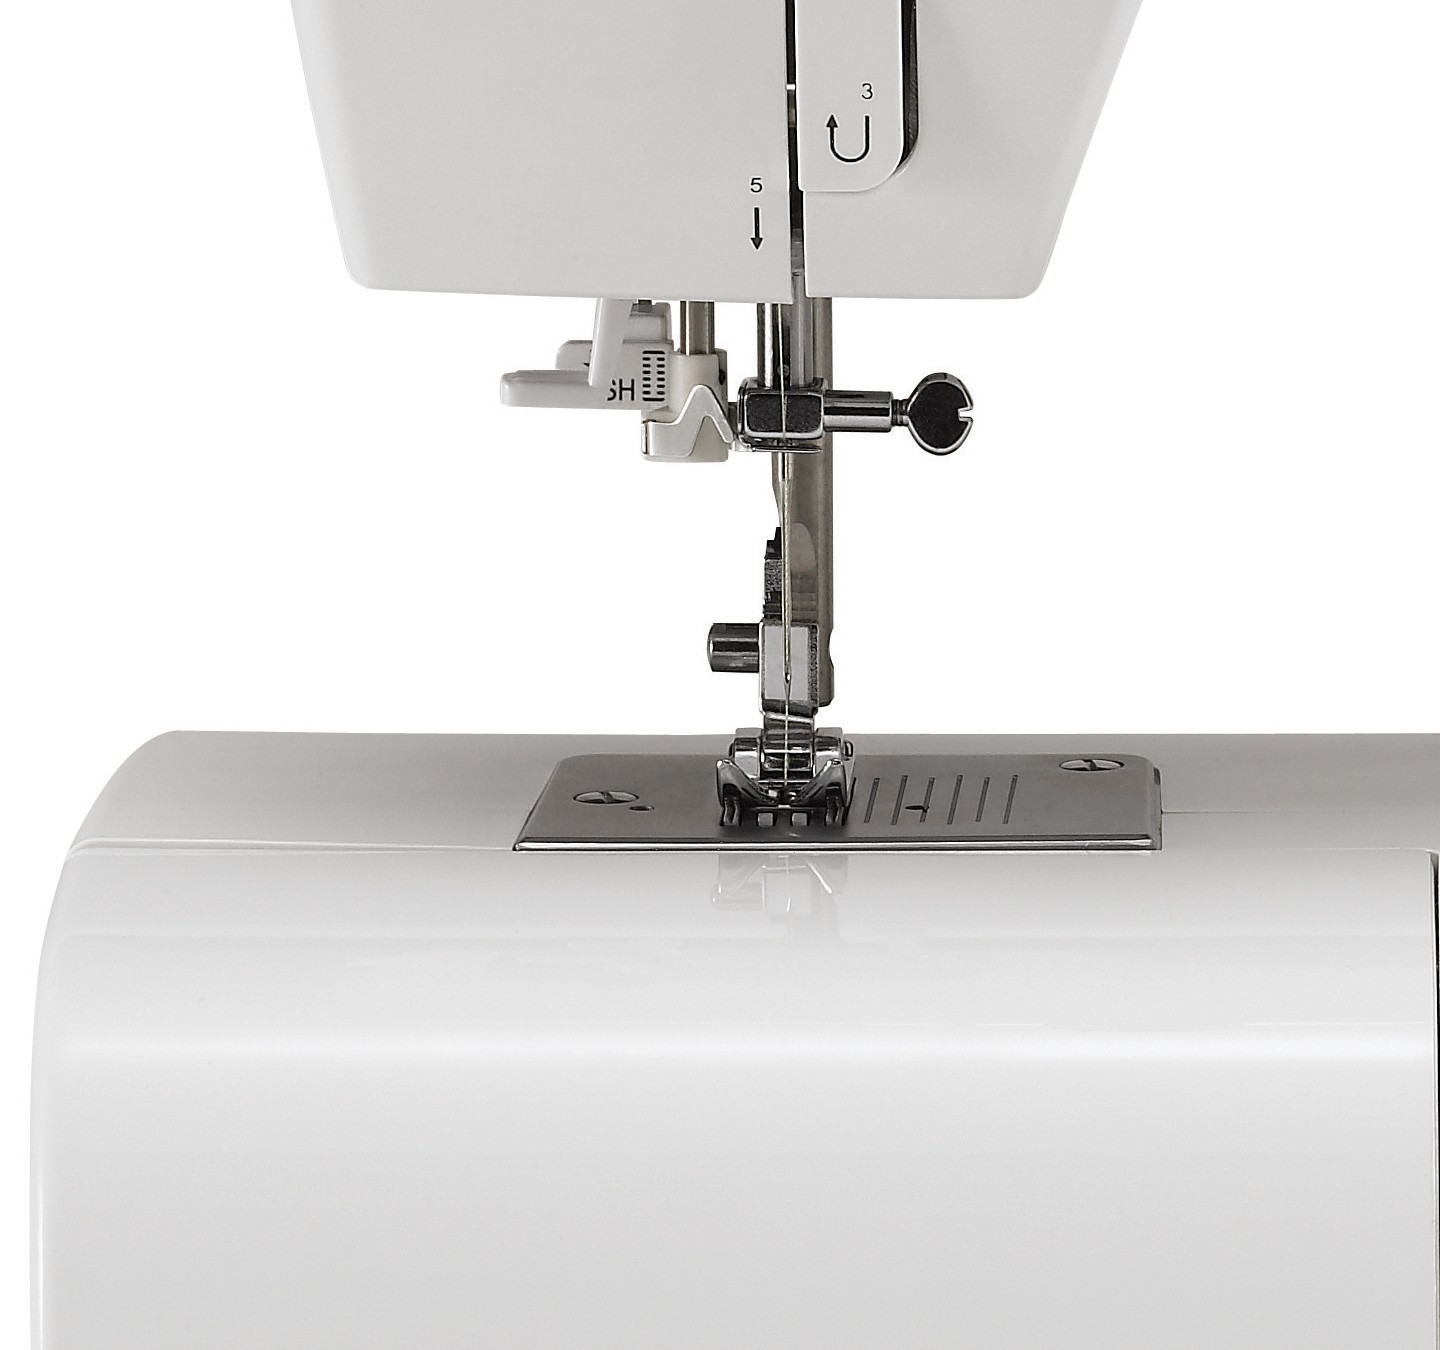 Singer 2273 Tradition Sewing Machine 